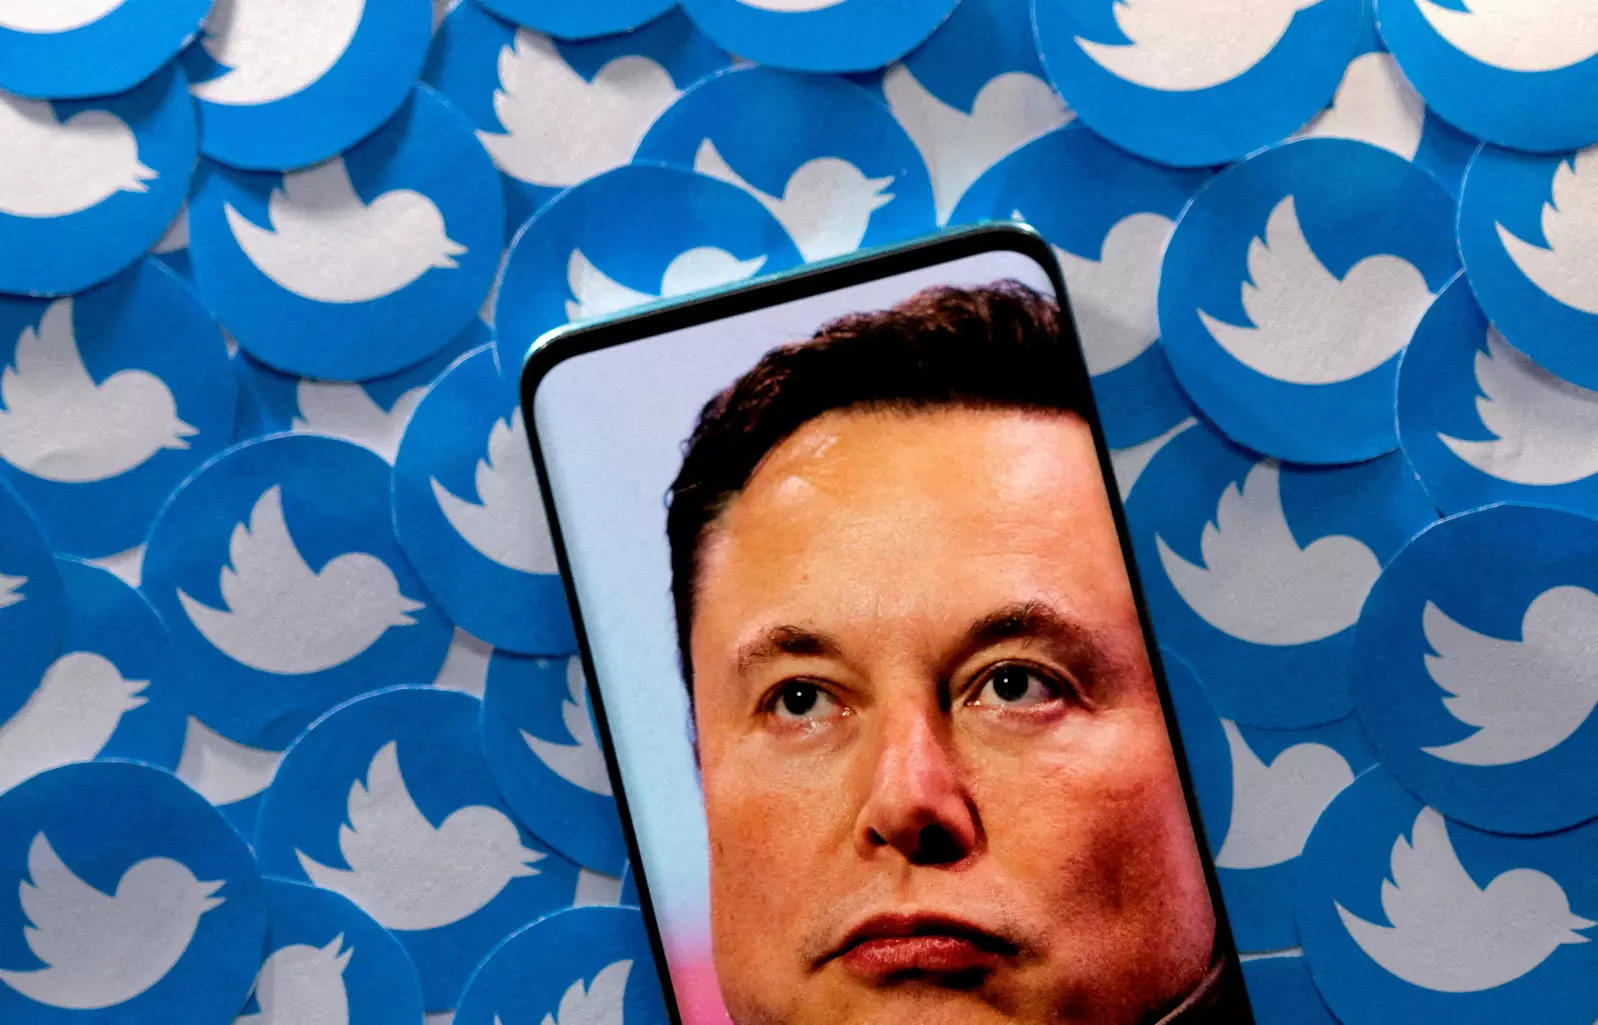 Twitter may actually become accurate, relevant news source: Elon Musk